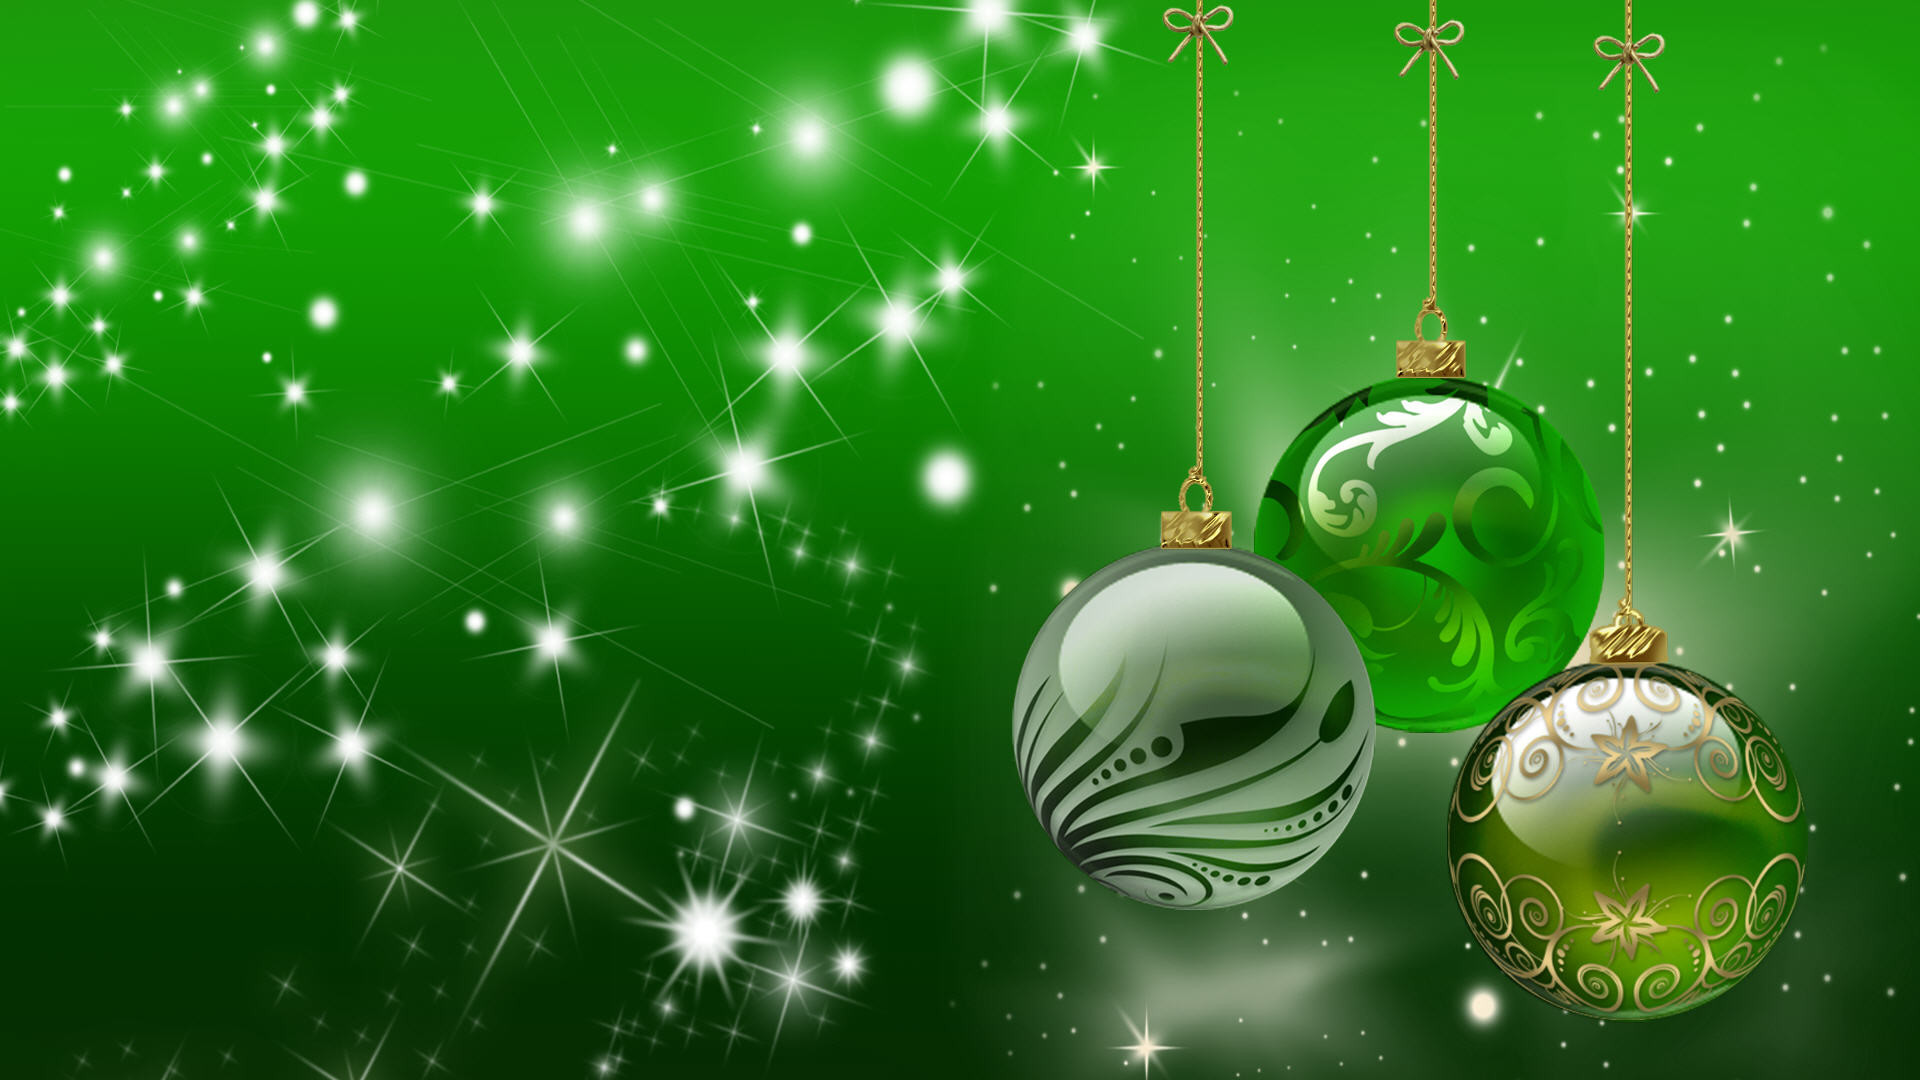 1920x1080 Green Holiday Backgrounds 18367